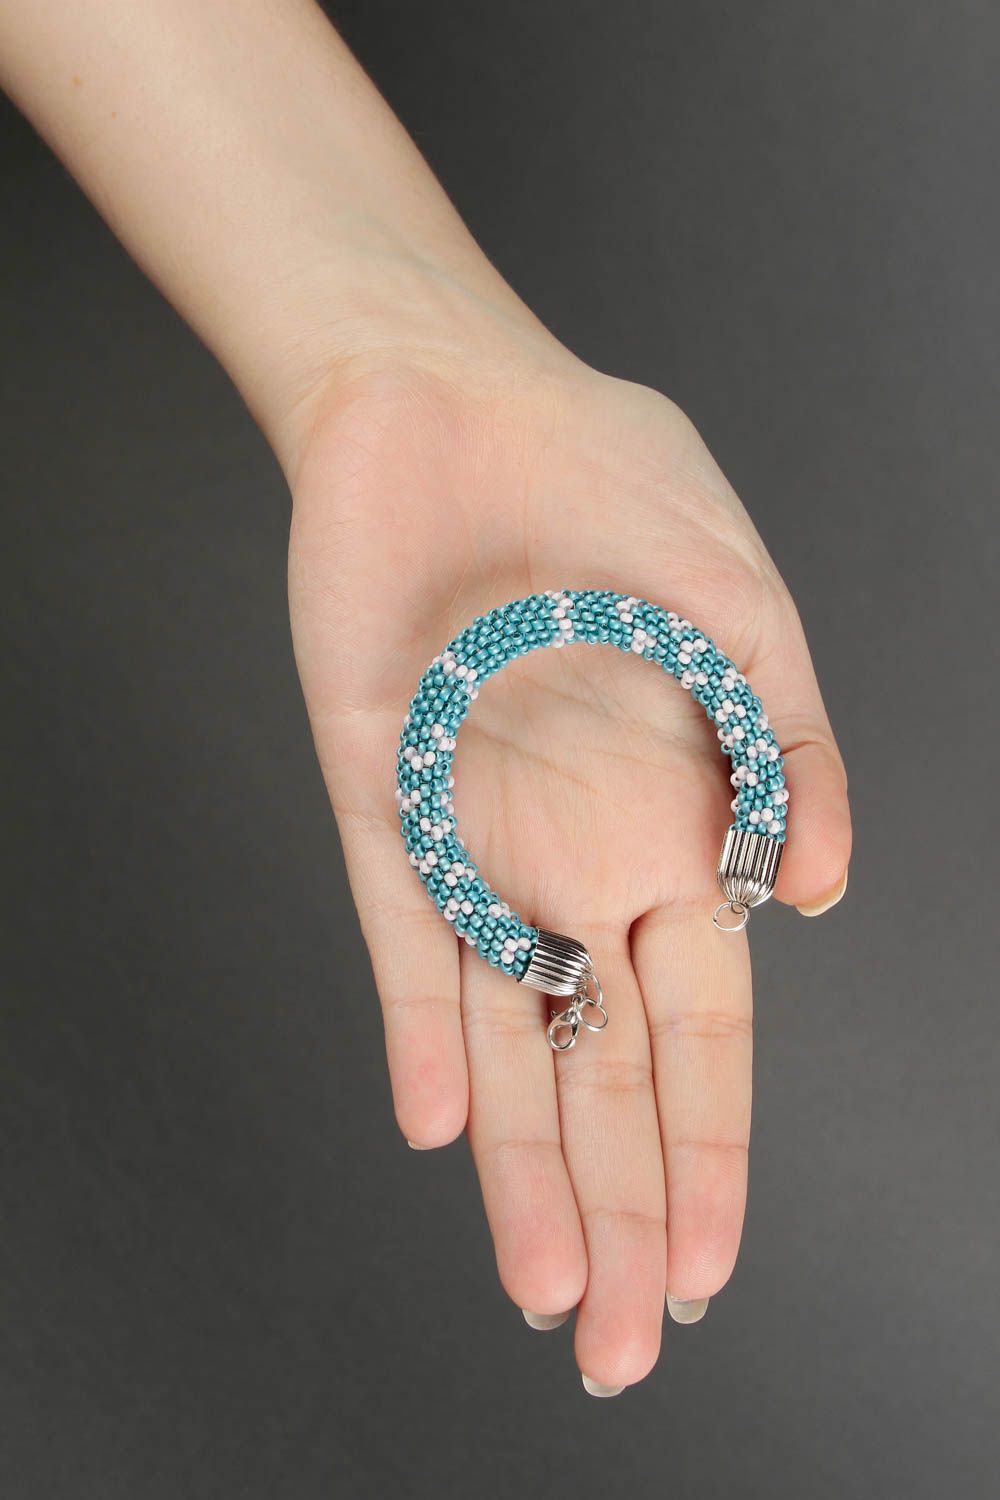 Handmade beaded cord bracelet in turquoise and white beads photo 2